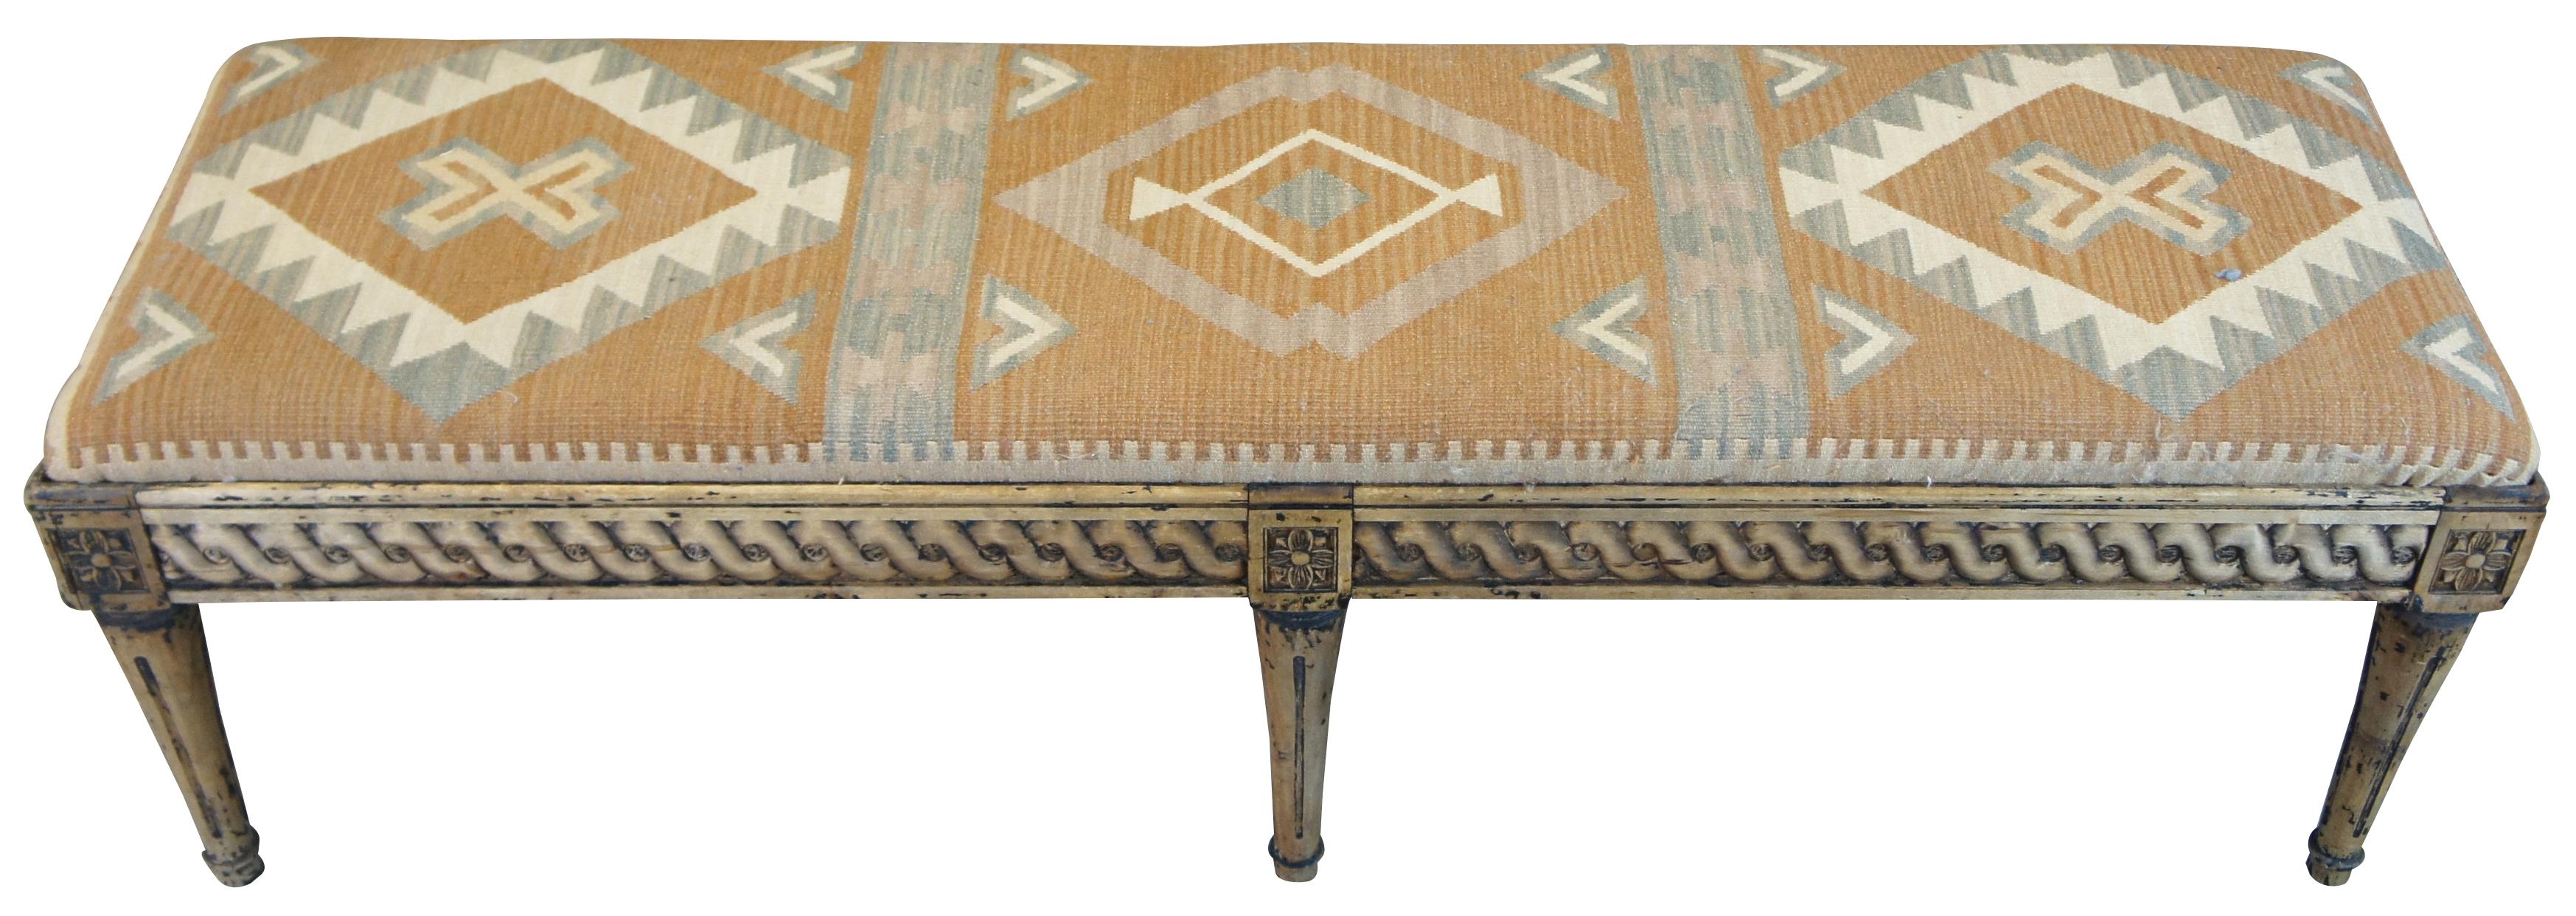 Arhaus Furniture Louis XVI style bench. A rectangular form made from kiln dried naturally distressed hardwood. Features classic design elements including a helix carved apron flanked by floret medallions. The bench is upholstered in a southwestern